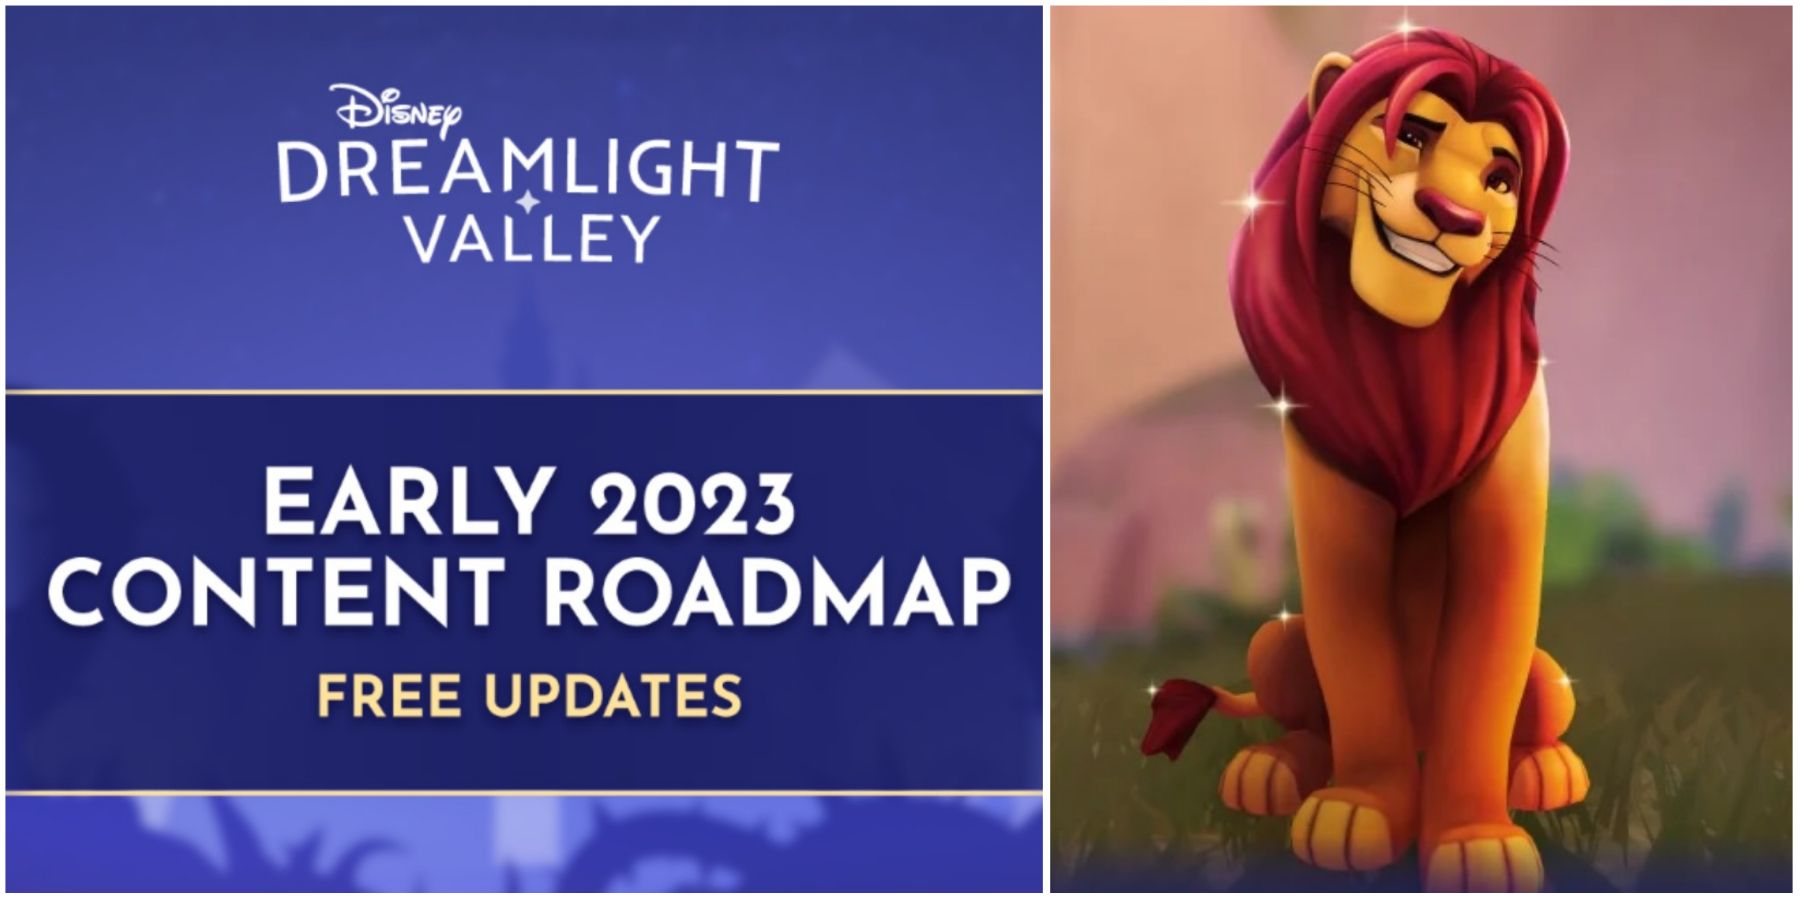 roadmap content update early 2023 ddv and simba